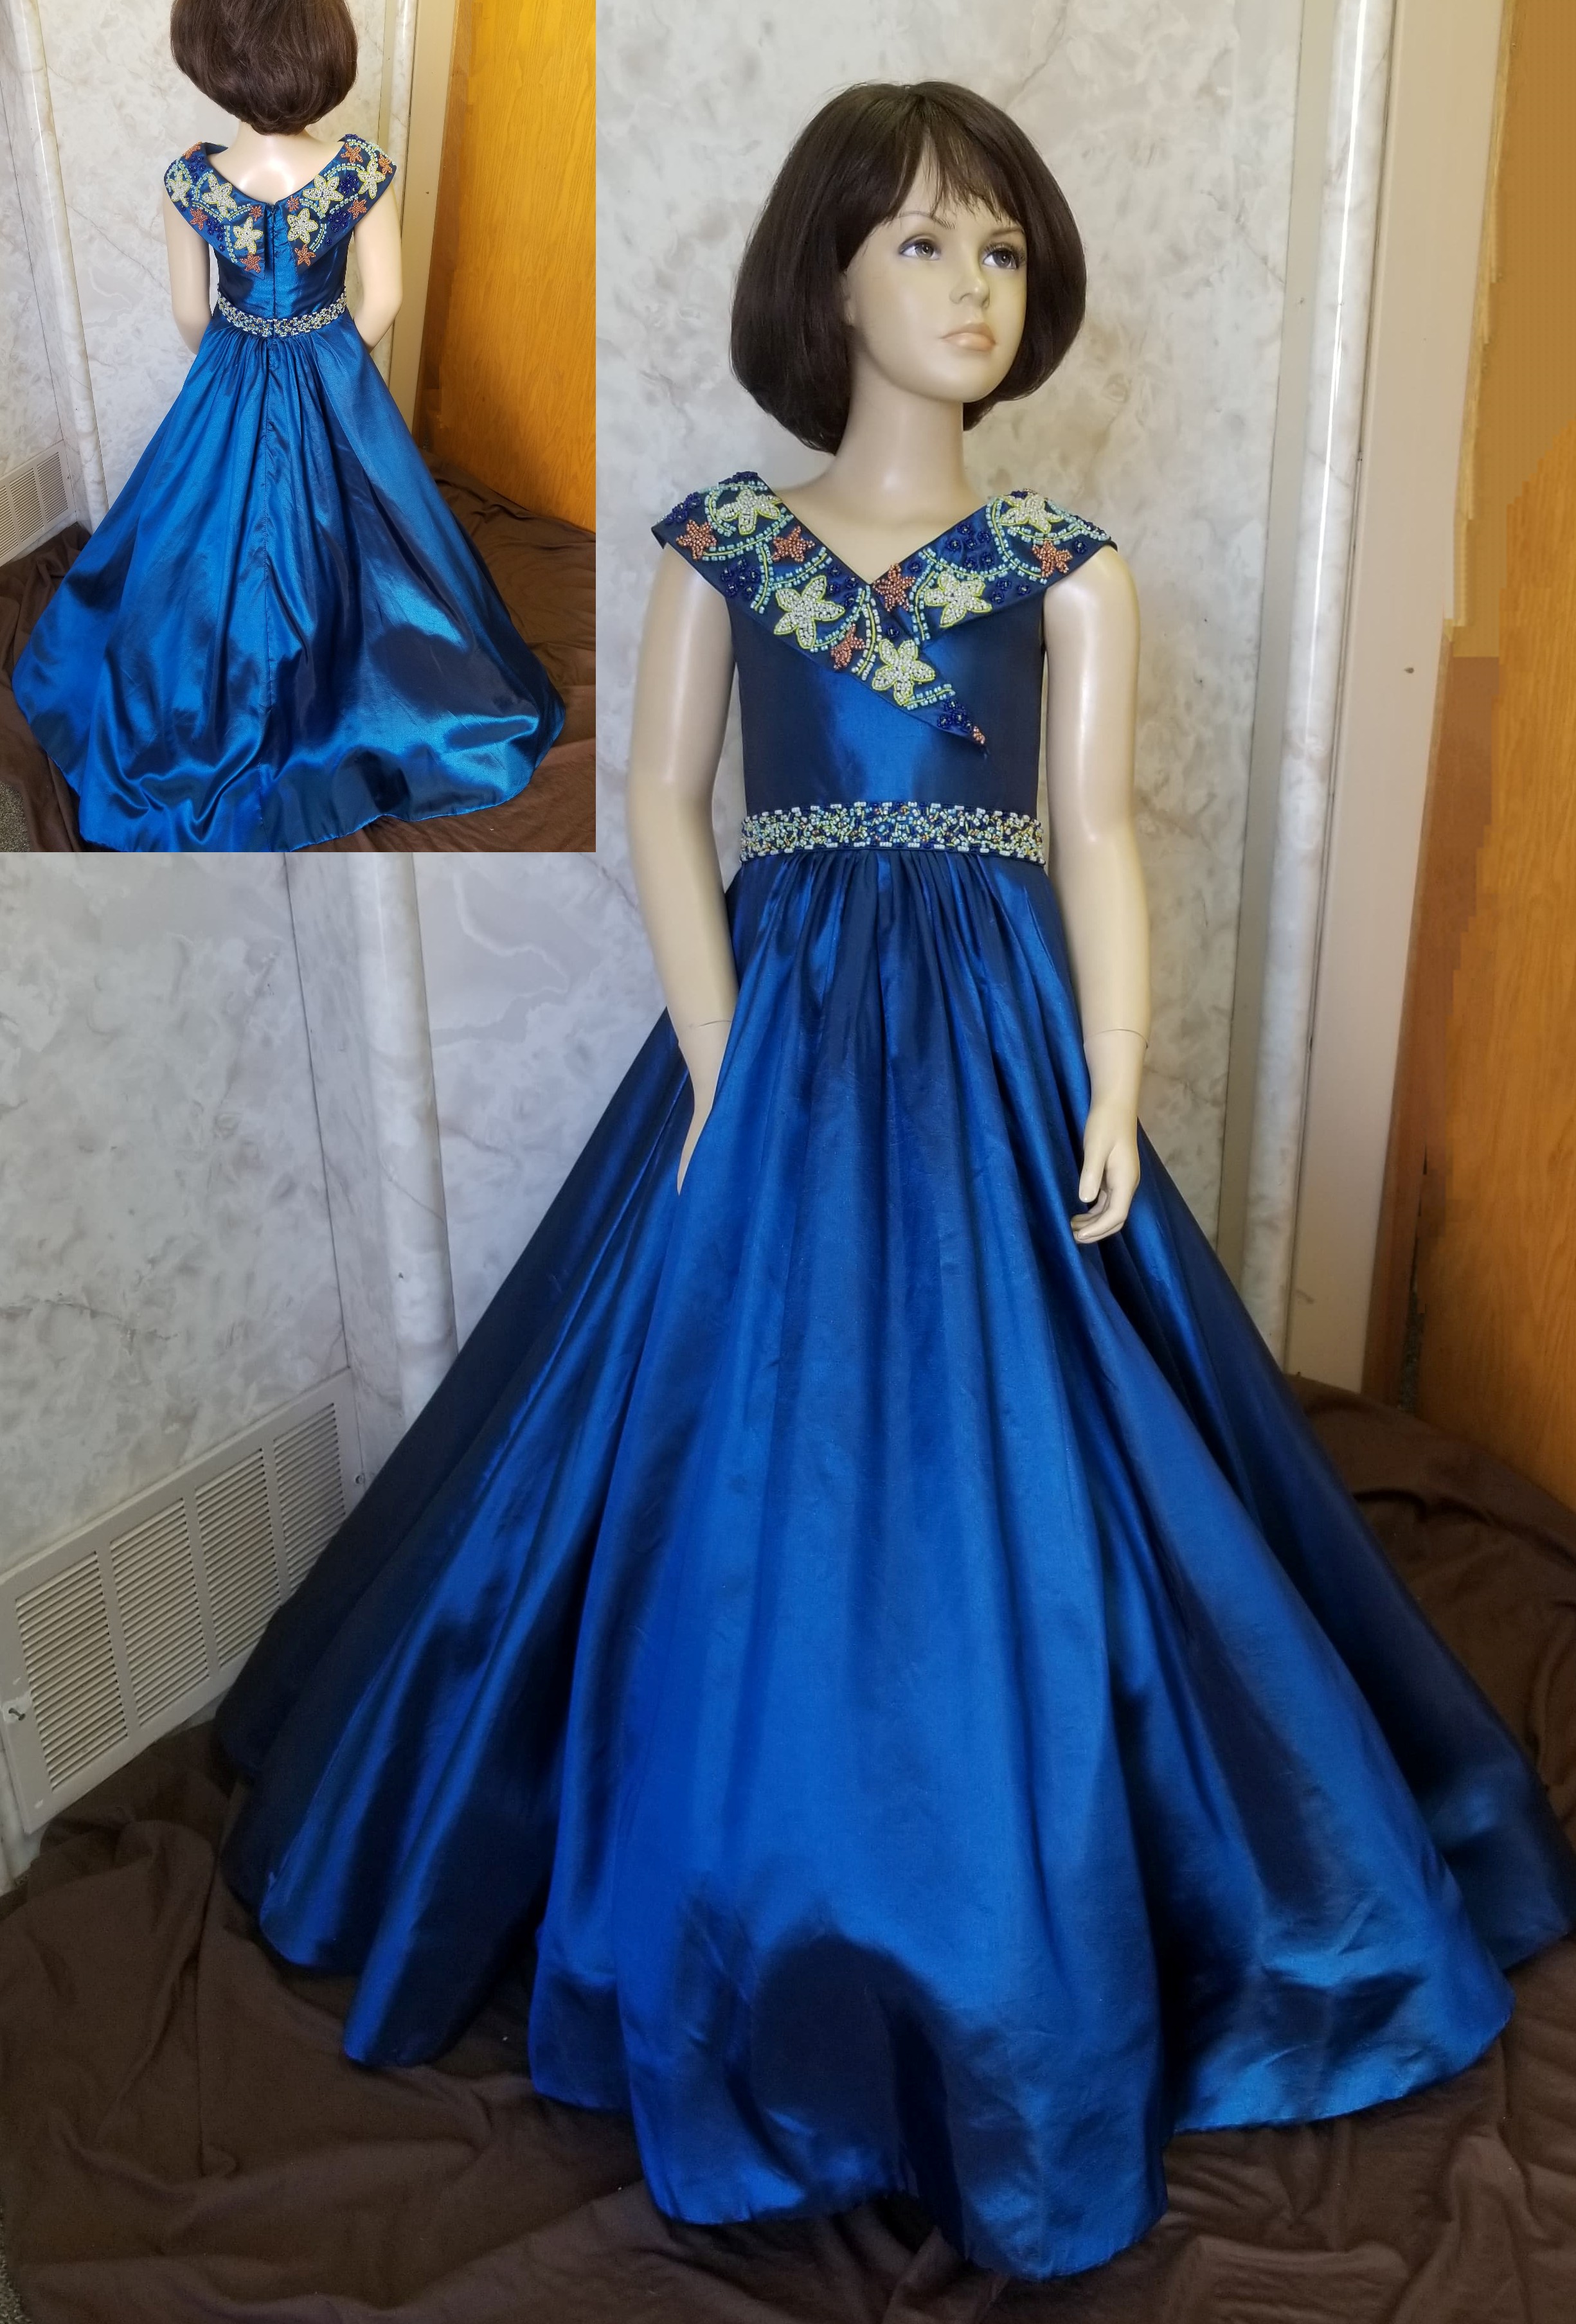 2021 hopeful pageant contestant gowns